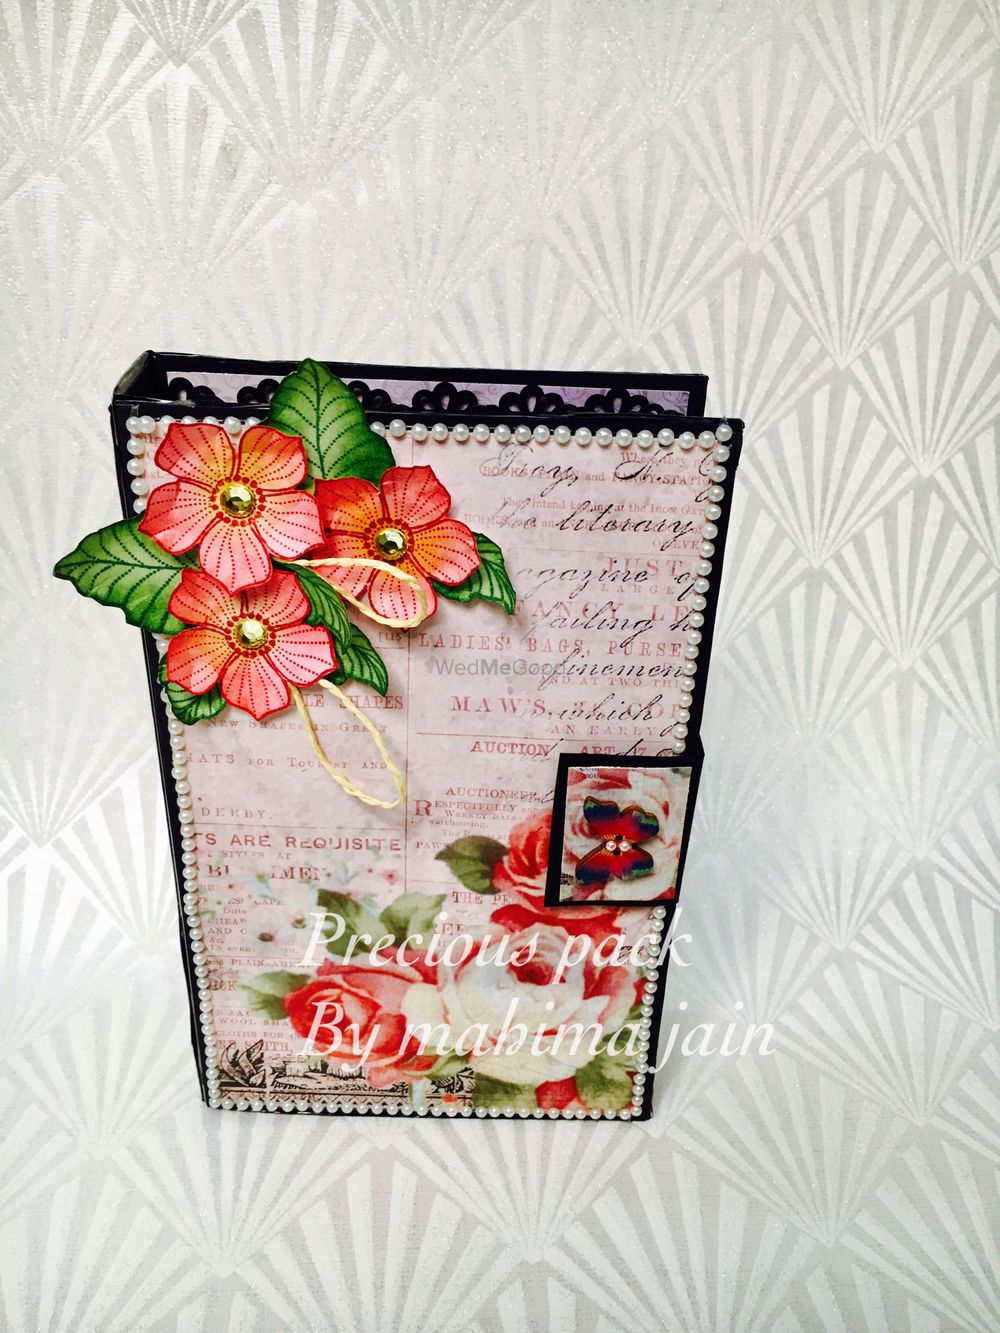 Photo From customised gifts - By Precious Pack